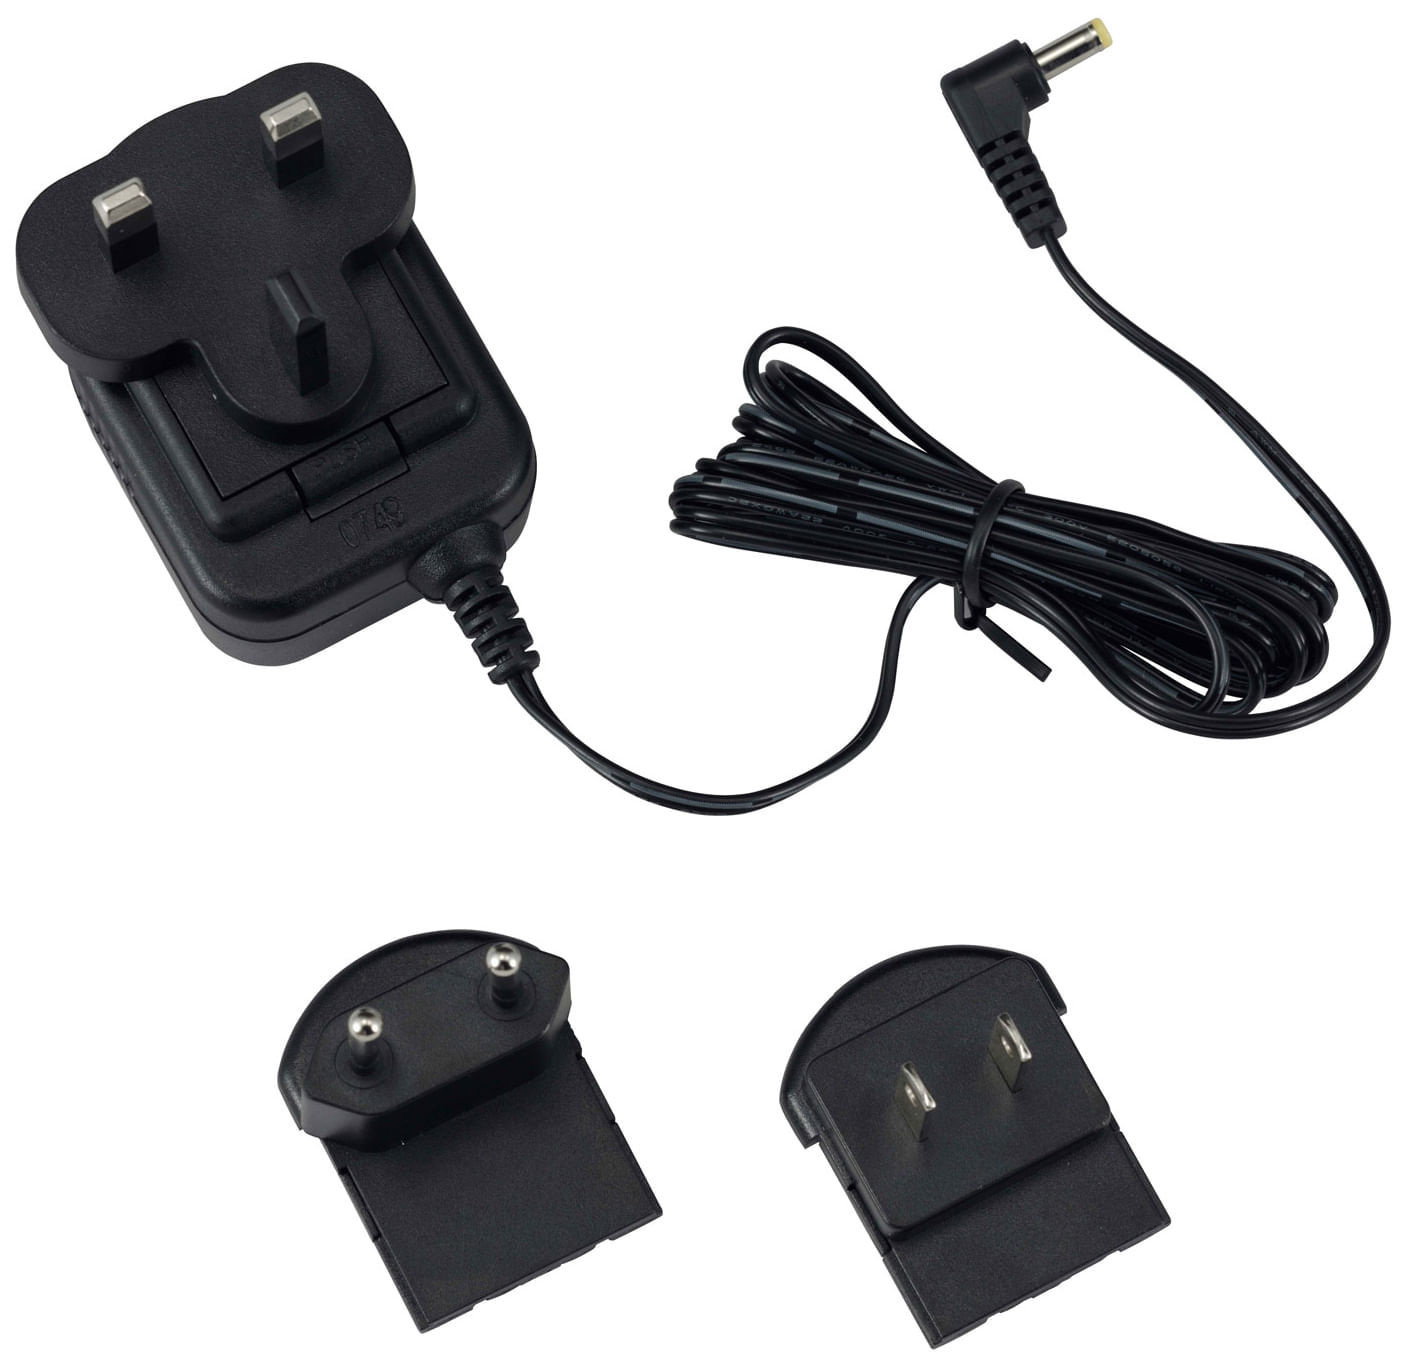 View larger image of Yamaha PA-D05 Power Adaptor for SV150 Silent Violin